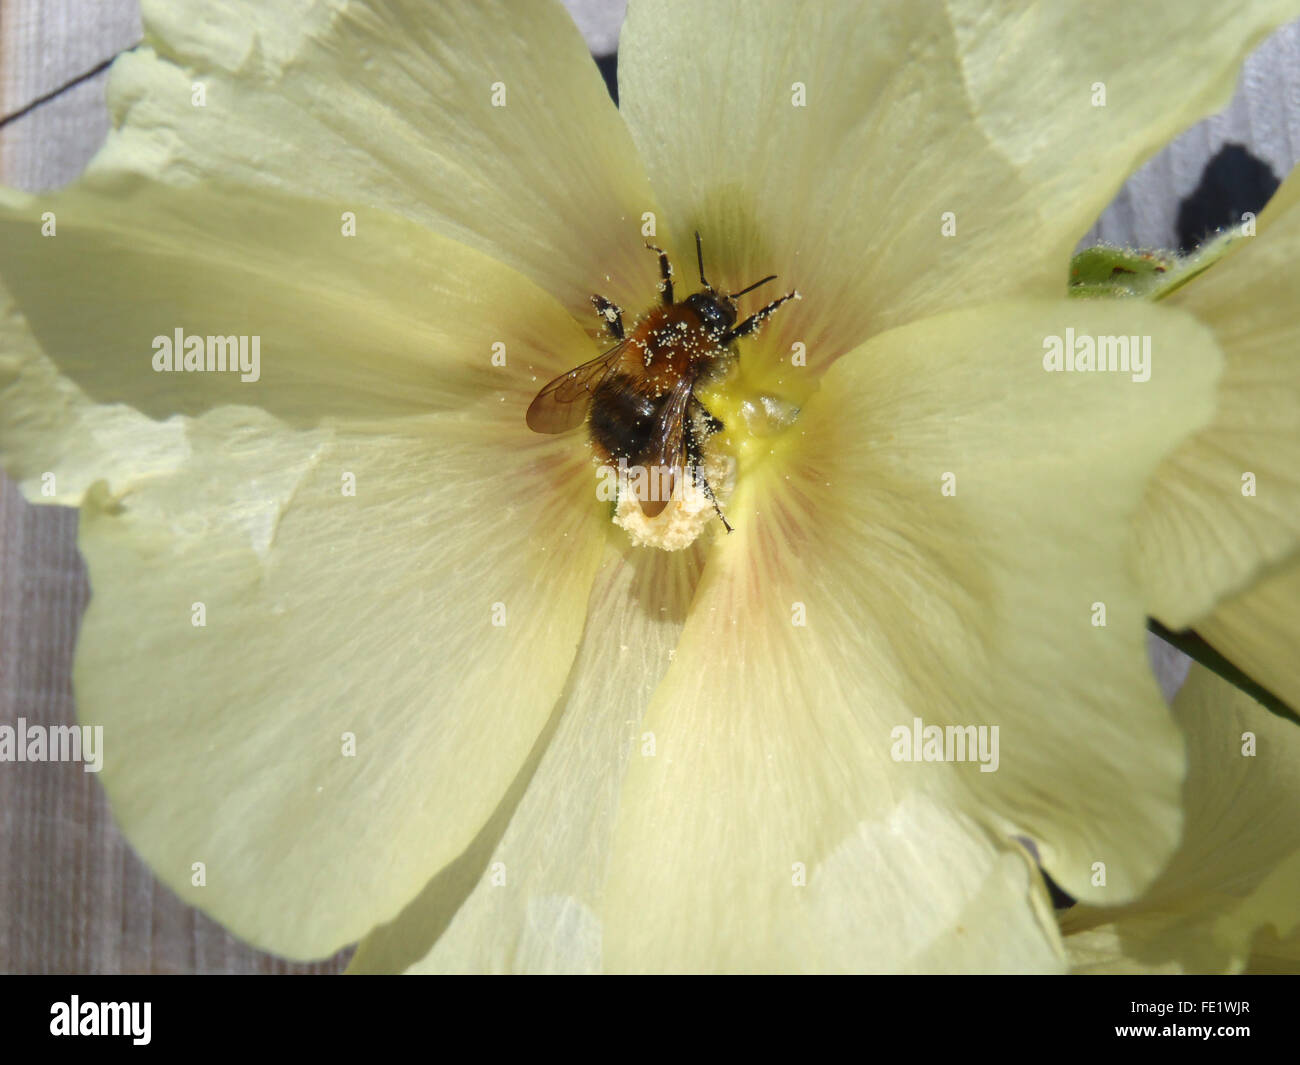 Mining bee (Andrena sp.) with pollen grains on a pale yellow hollyhock (Alcea rosa) Stock Photo